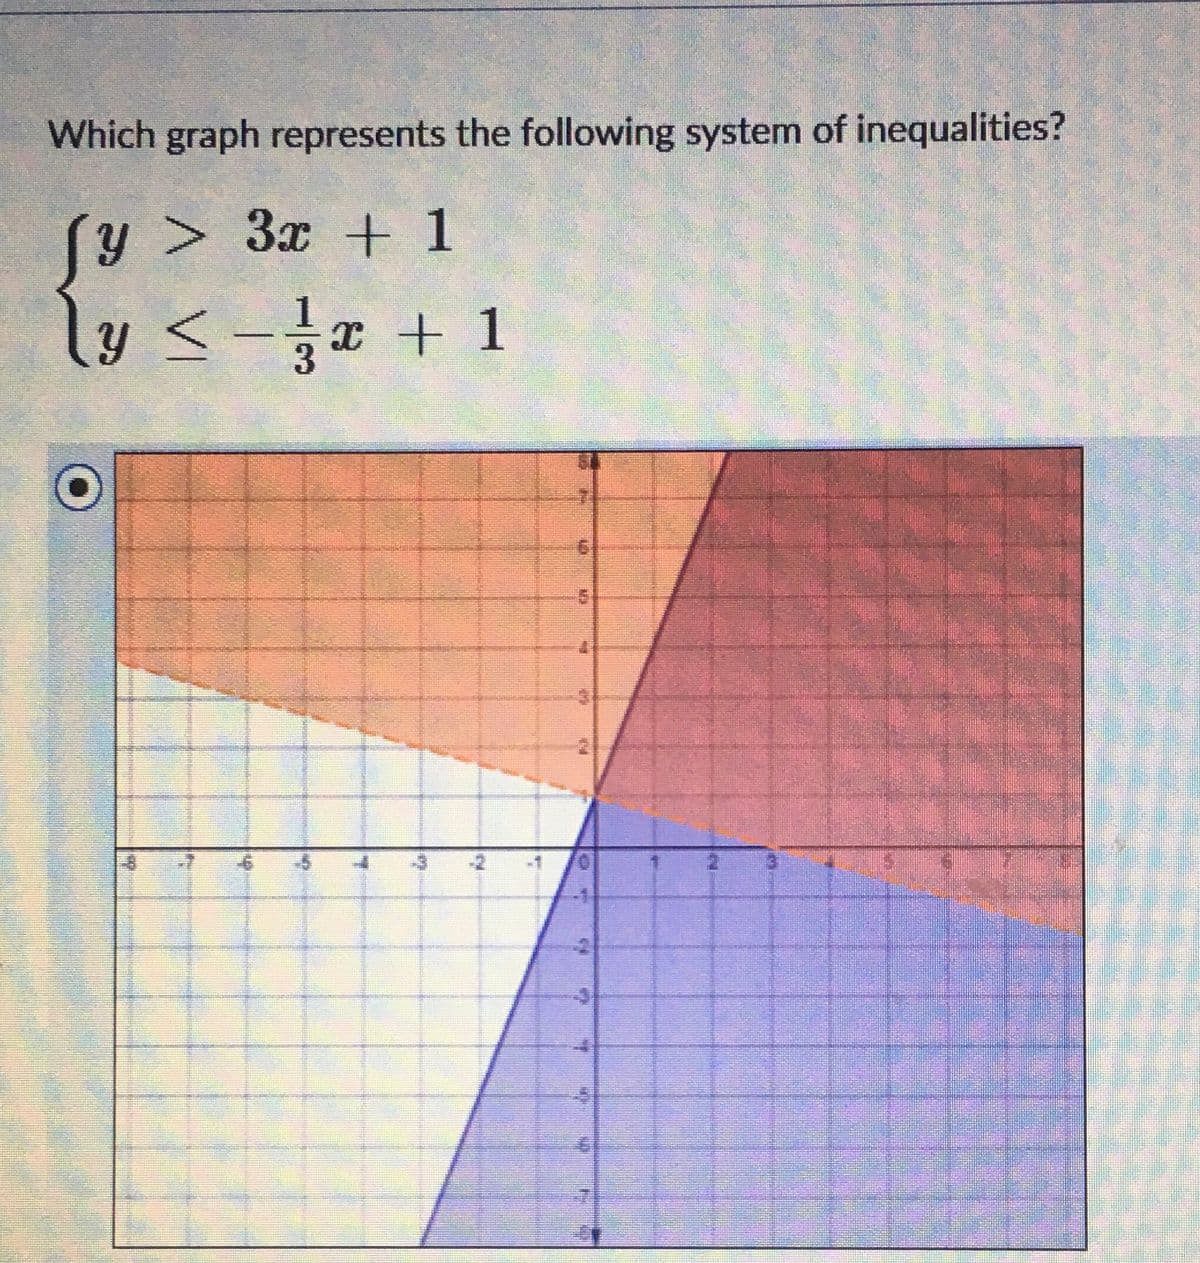 Which graph represents the following system of inequalities?
Jy > 3x + 1
โy < −∞ + 1
O